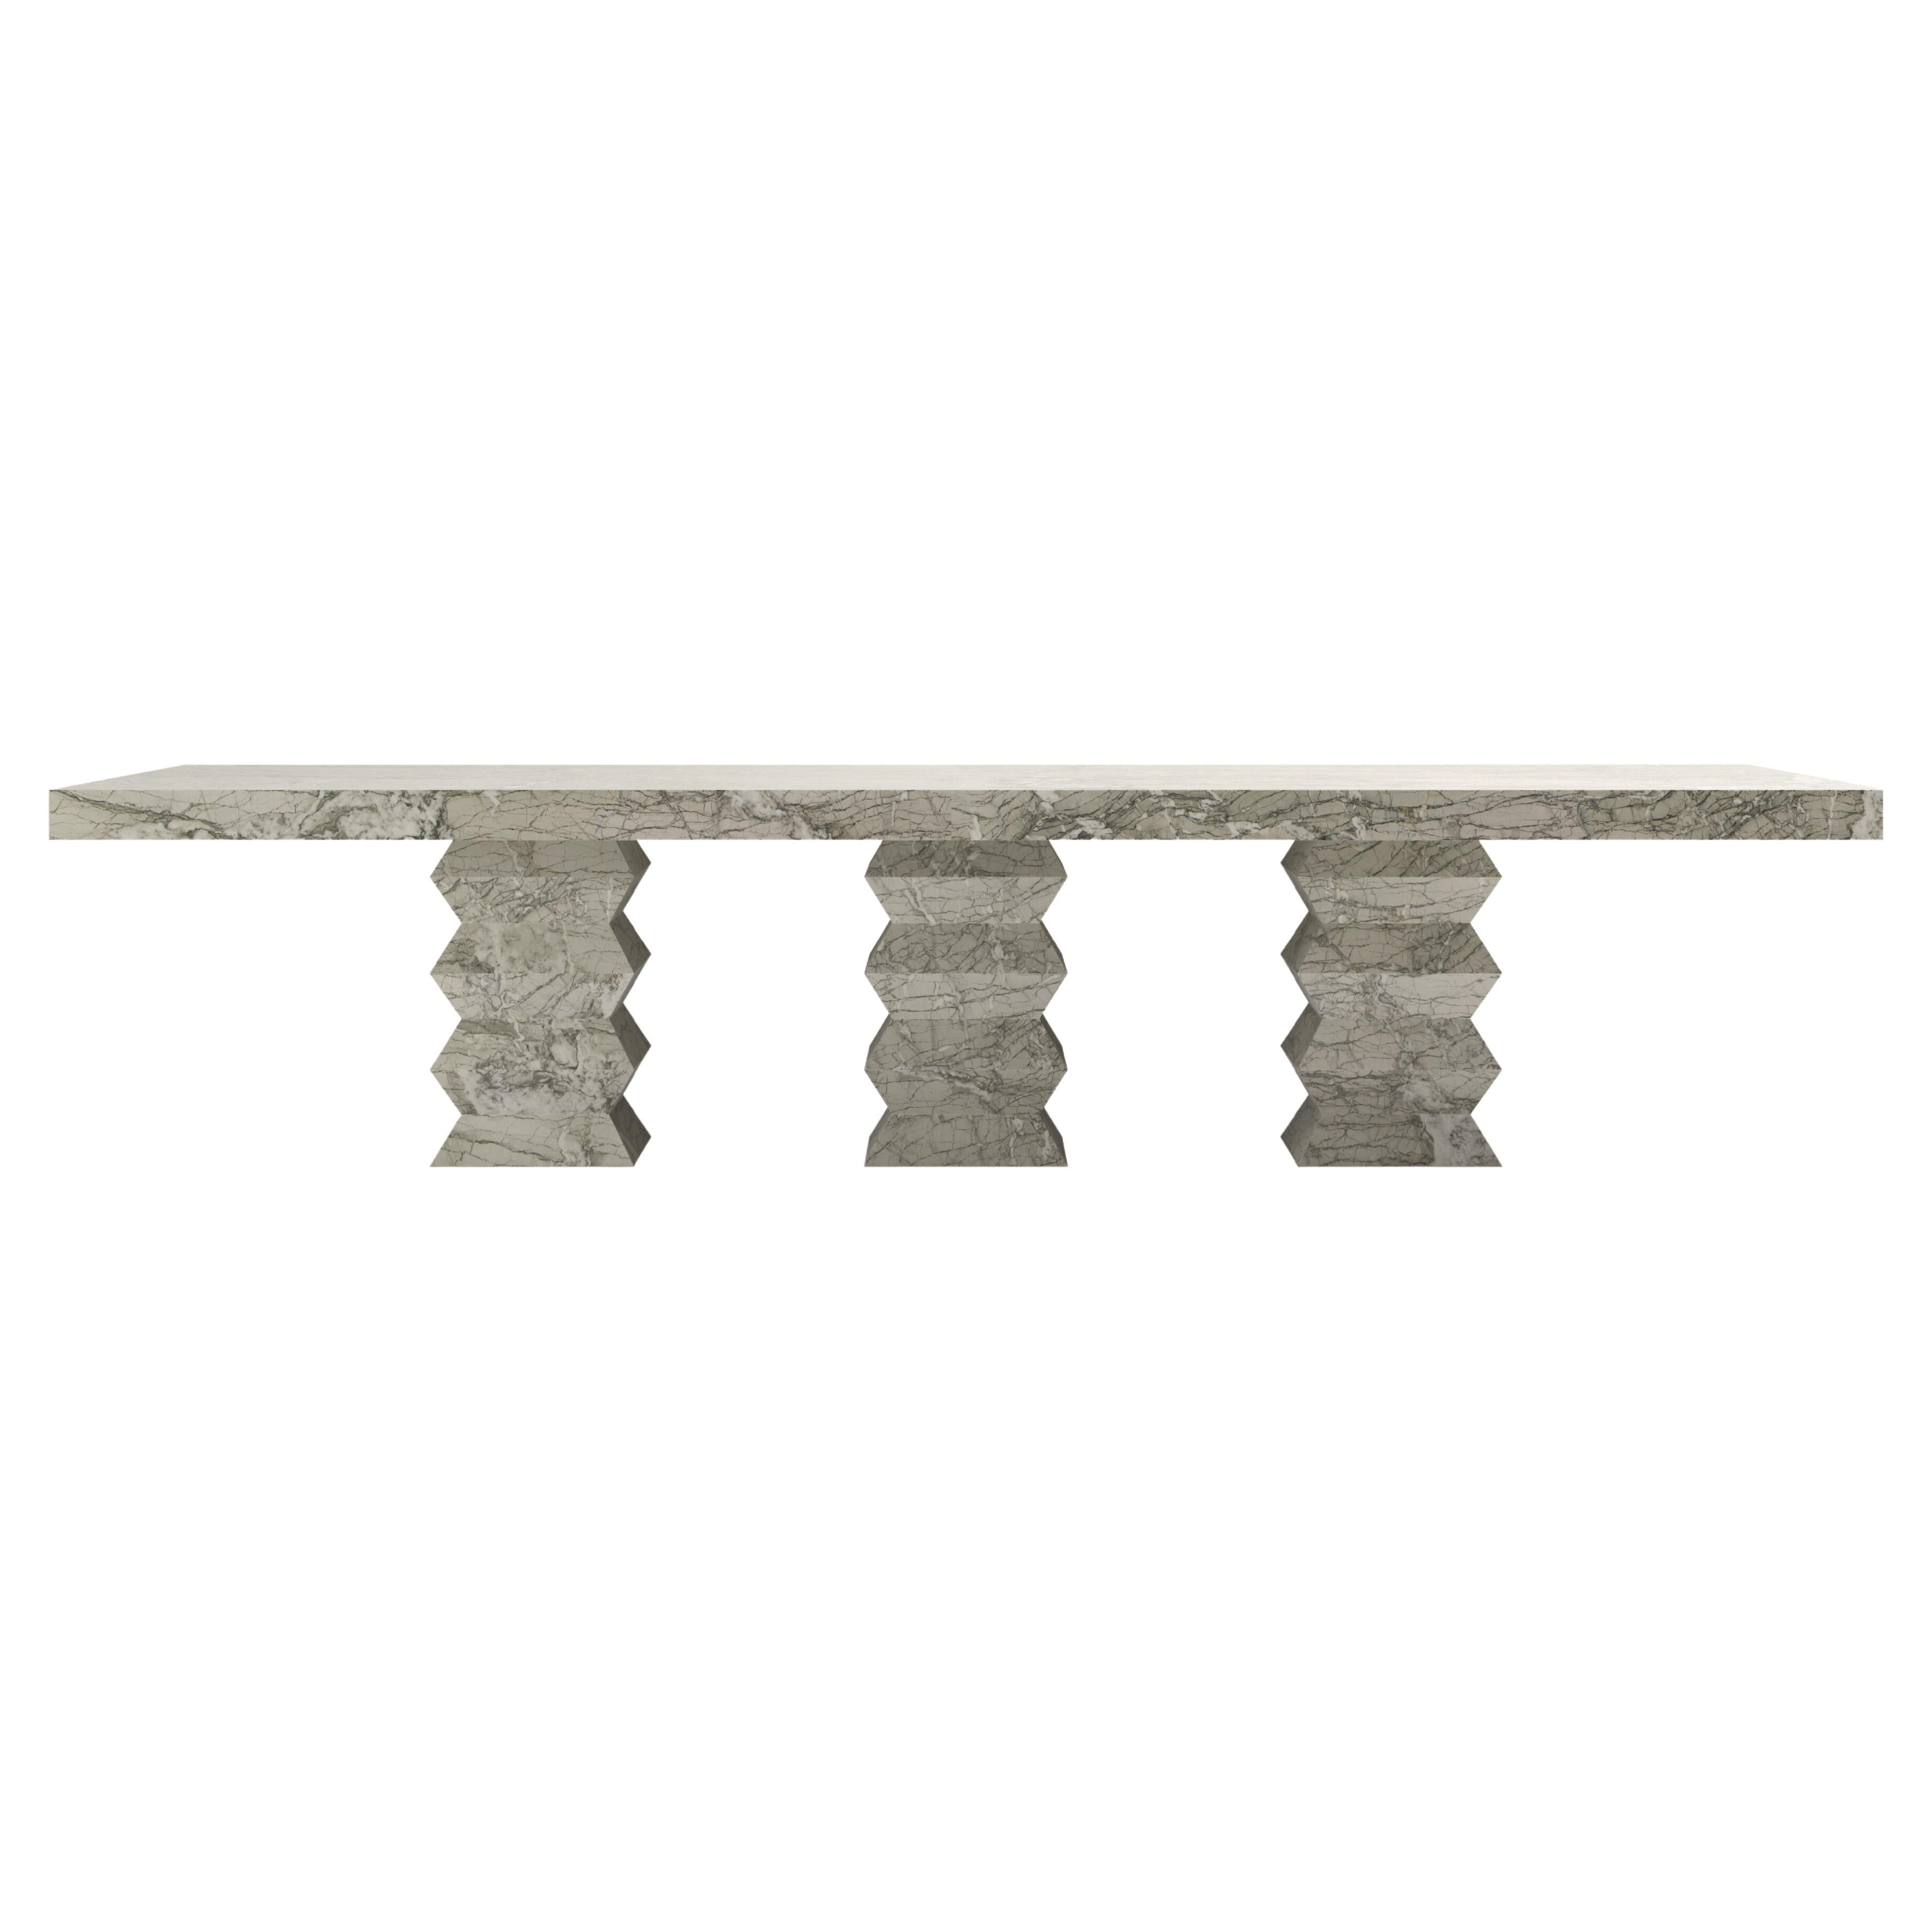 FORM(LA) Grinza Rectangle Dining Table 144"L x 48"W x 32"H Verde Antigua Marble For Sale